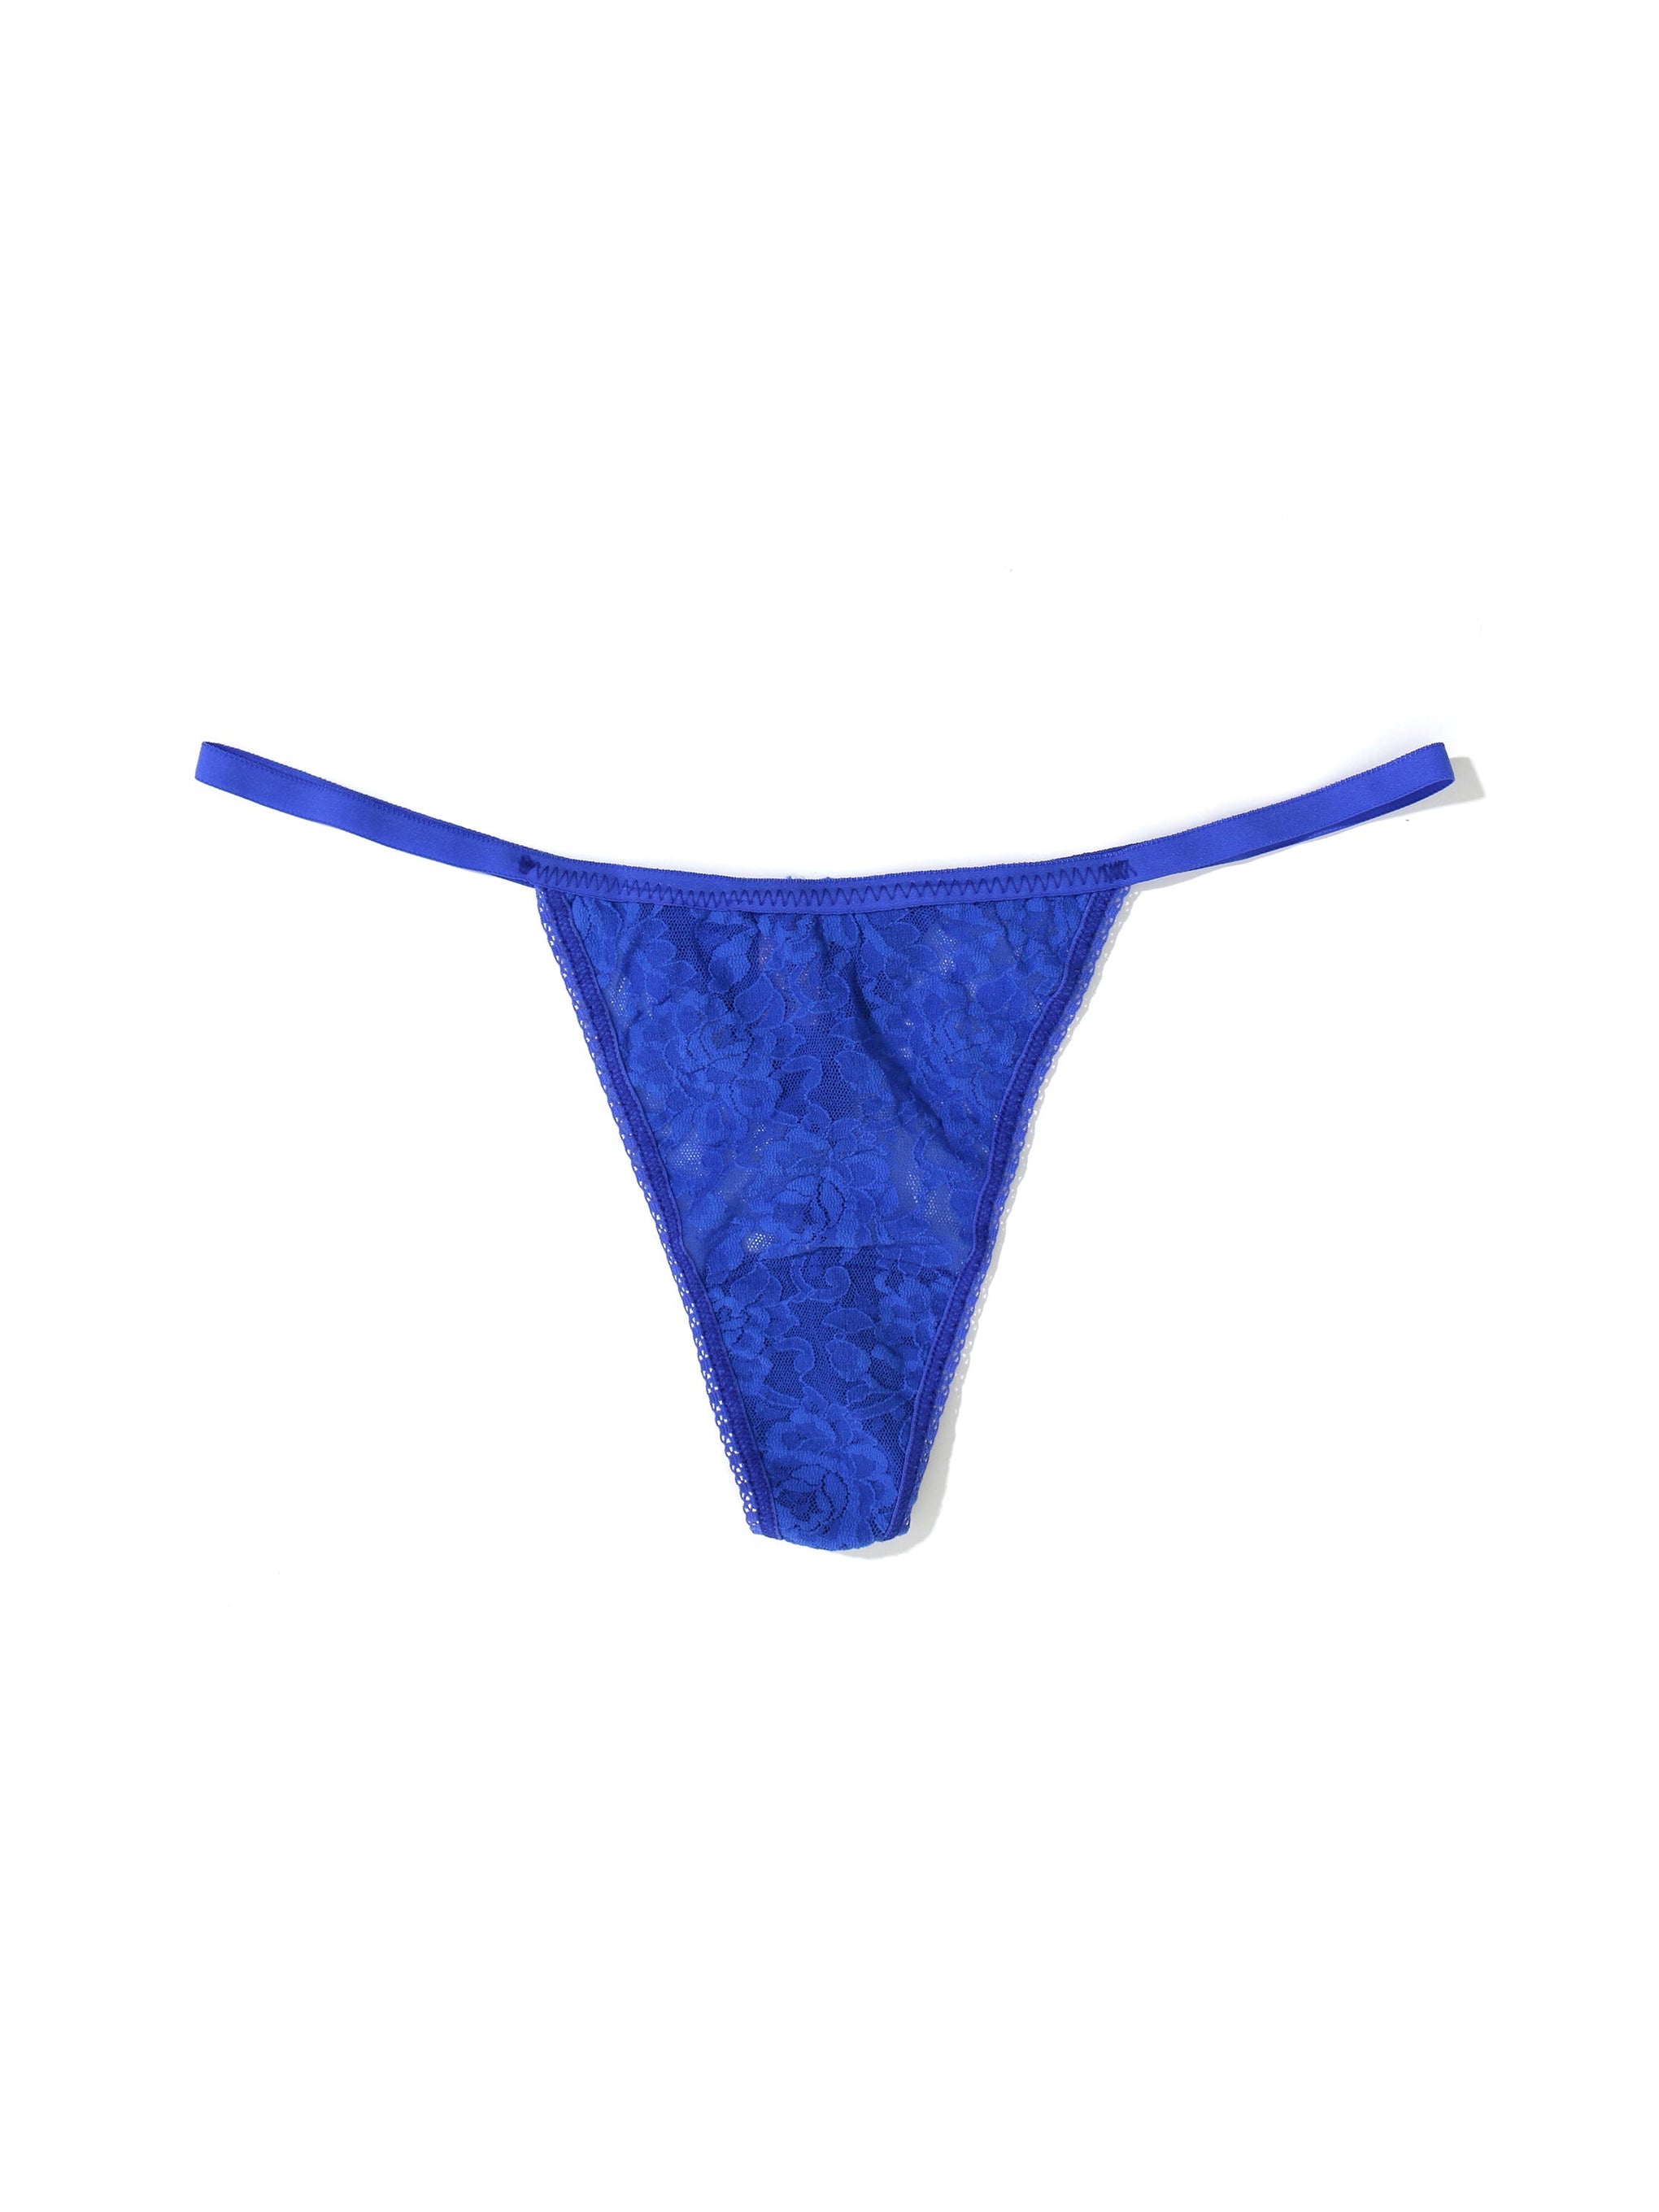 Womens Hanky Panky blue Lace High-Rise G-String